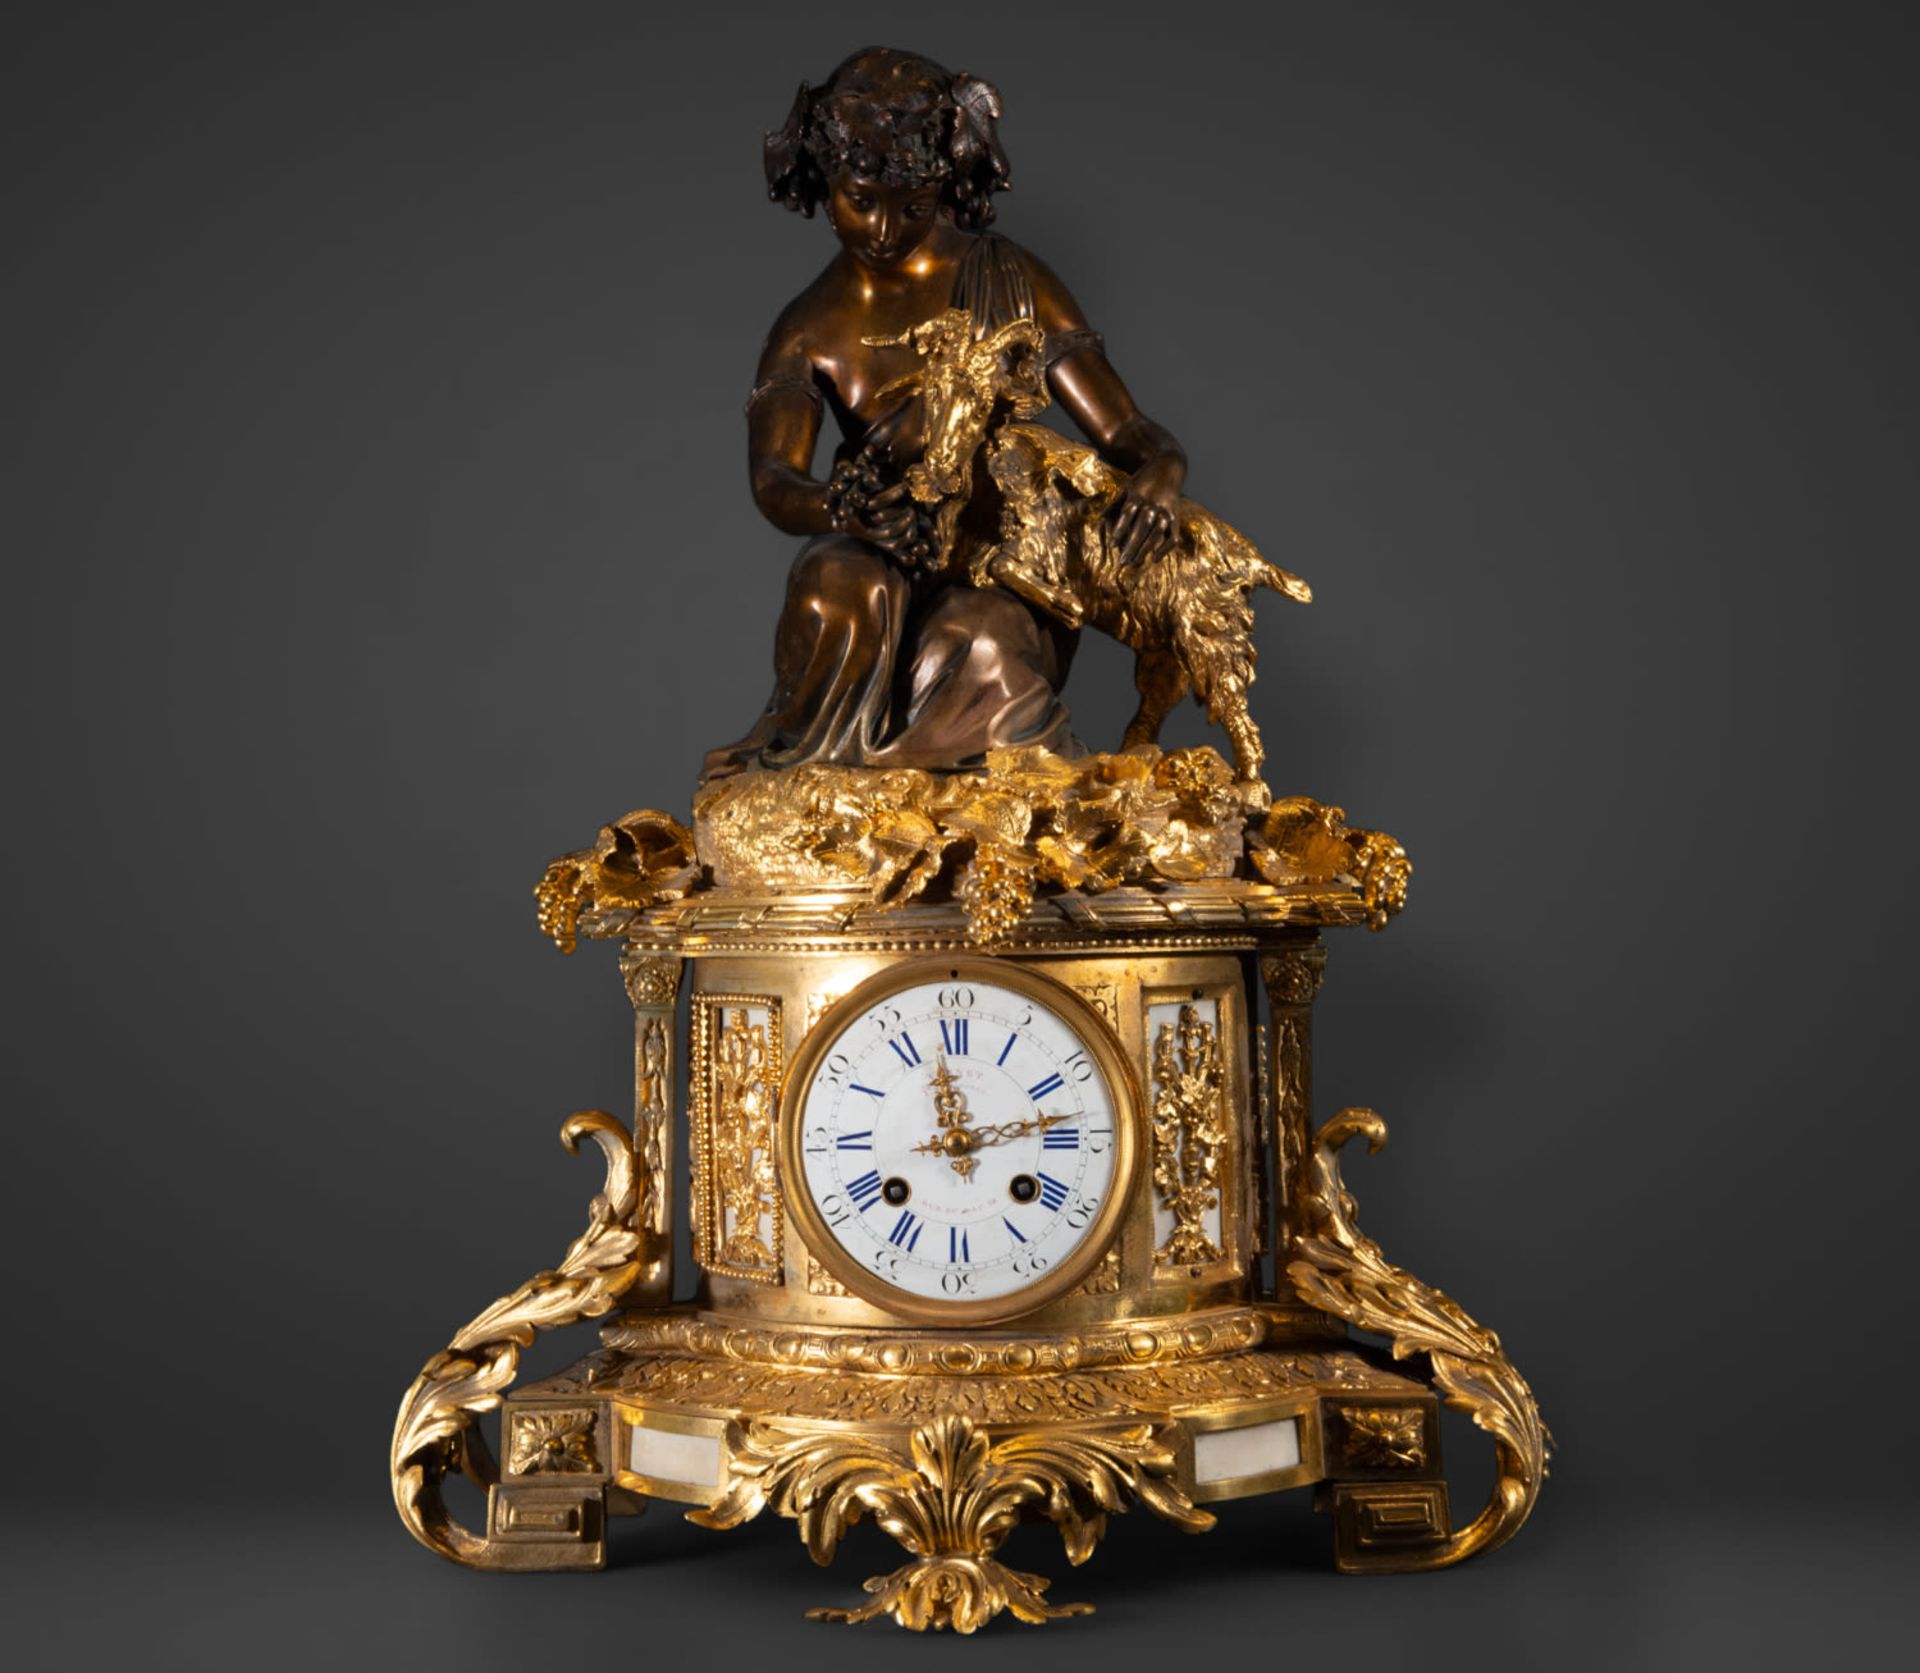 Exquisite Large French Table Clock in Mercury-Gilded Bronze and Alabaster with Bacchus and Goat, Nap